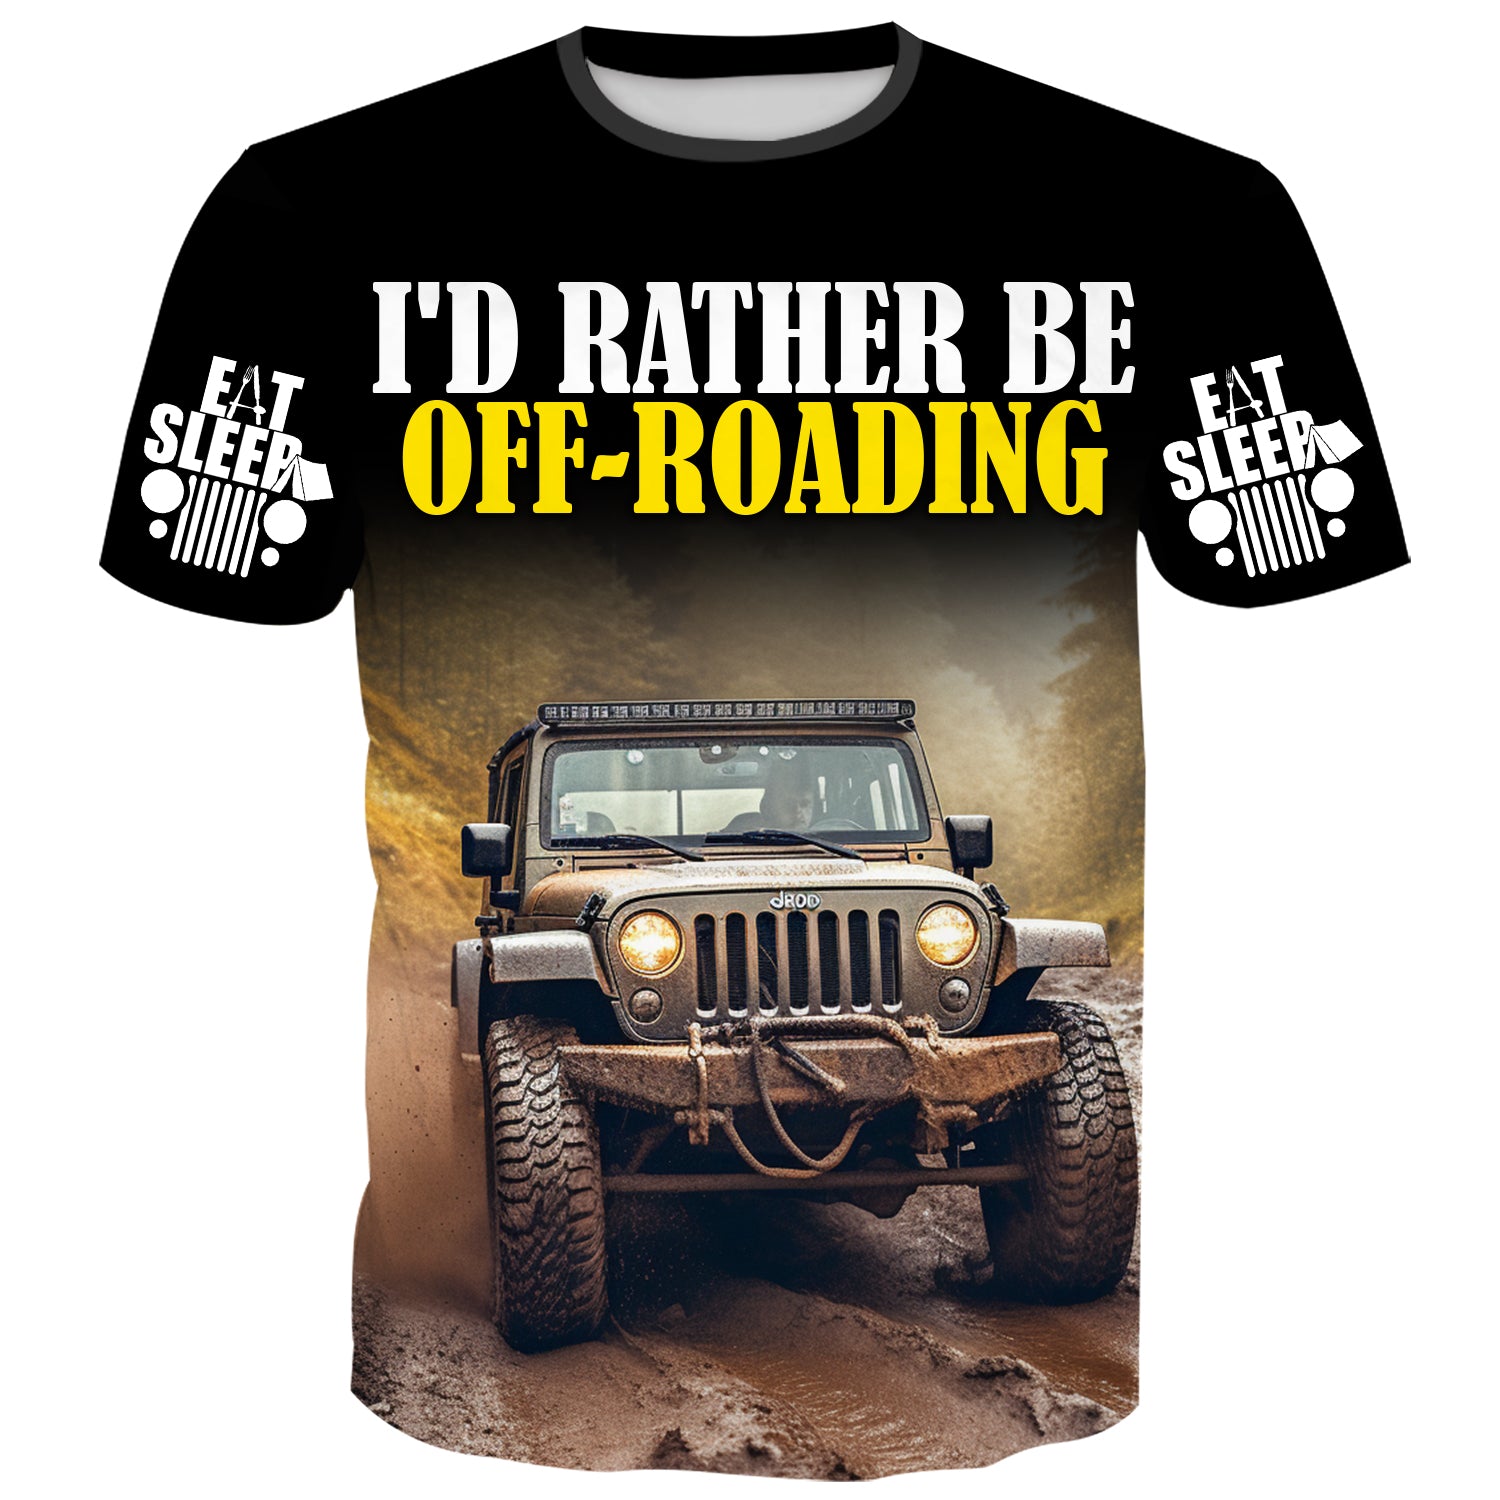 I'd rather be Off-Roading - T-Shirt